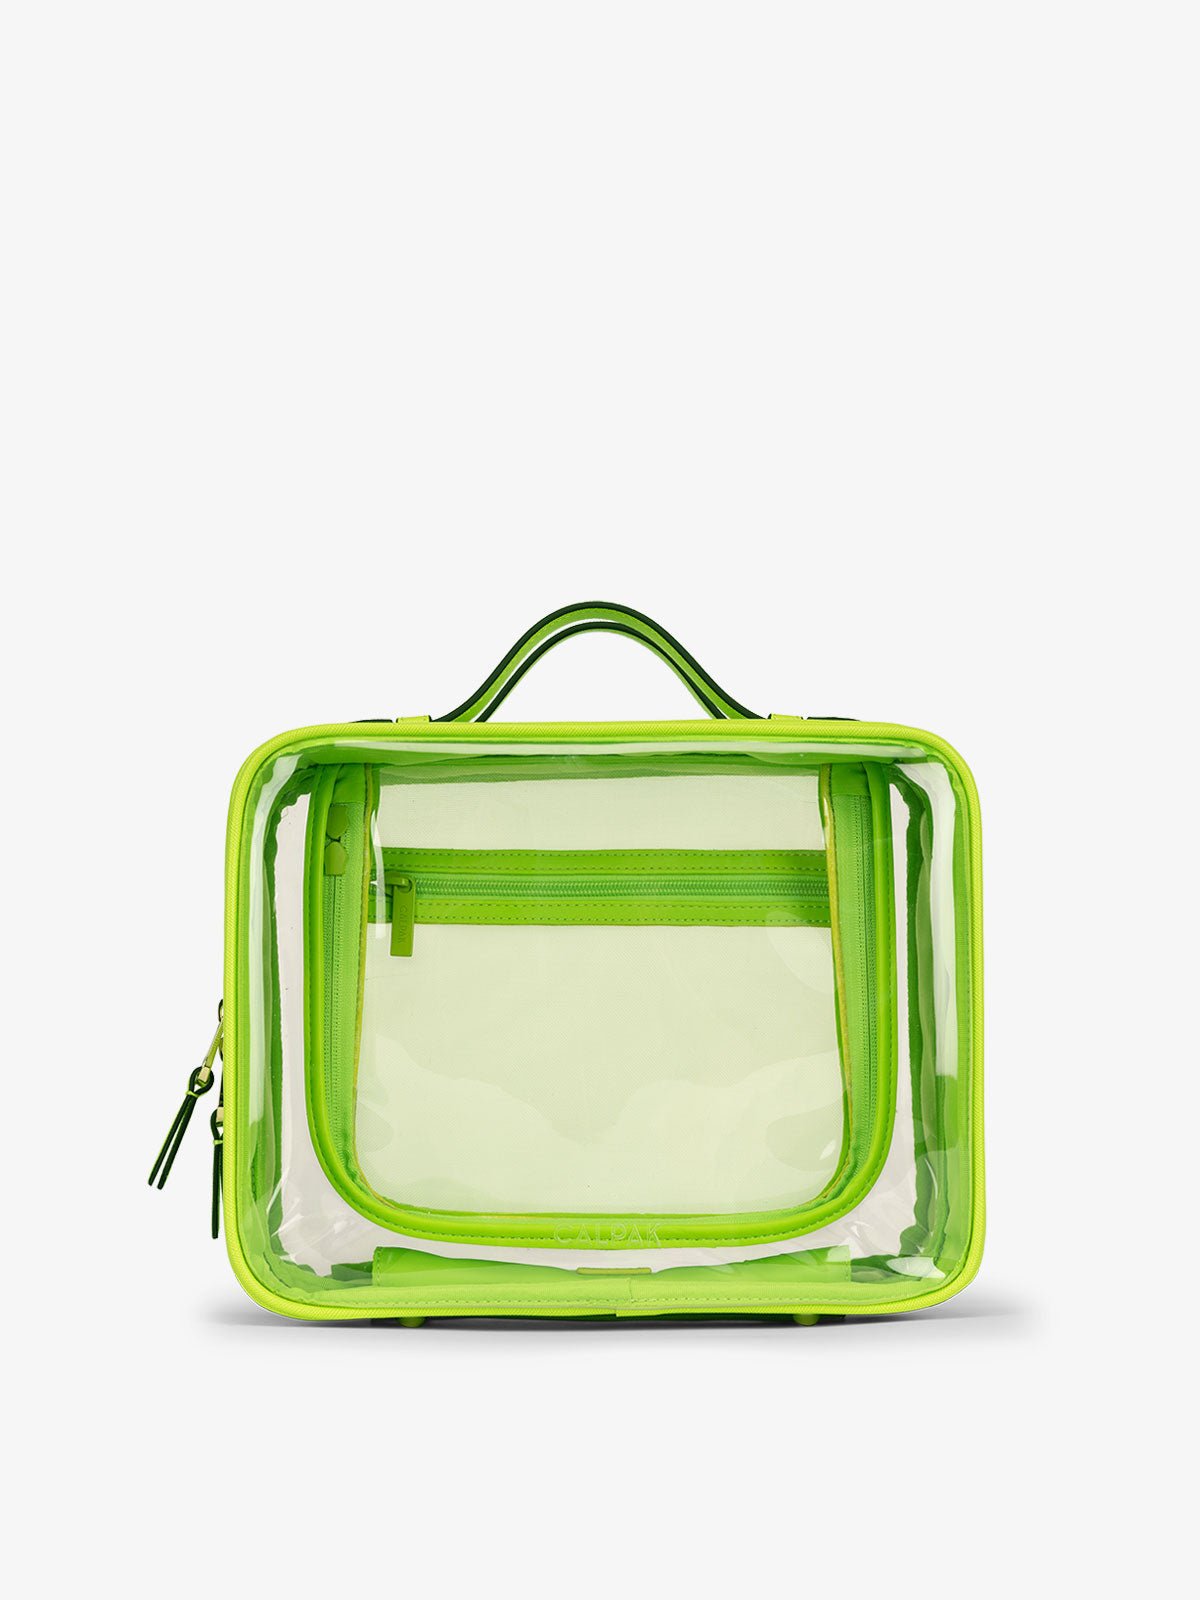 CALPAK Large clear makeup bag with zippered compartments in electric lime